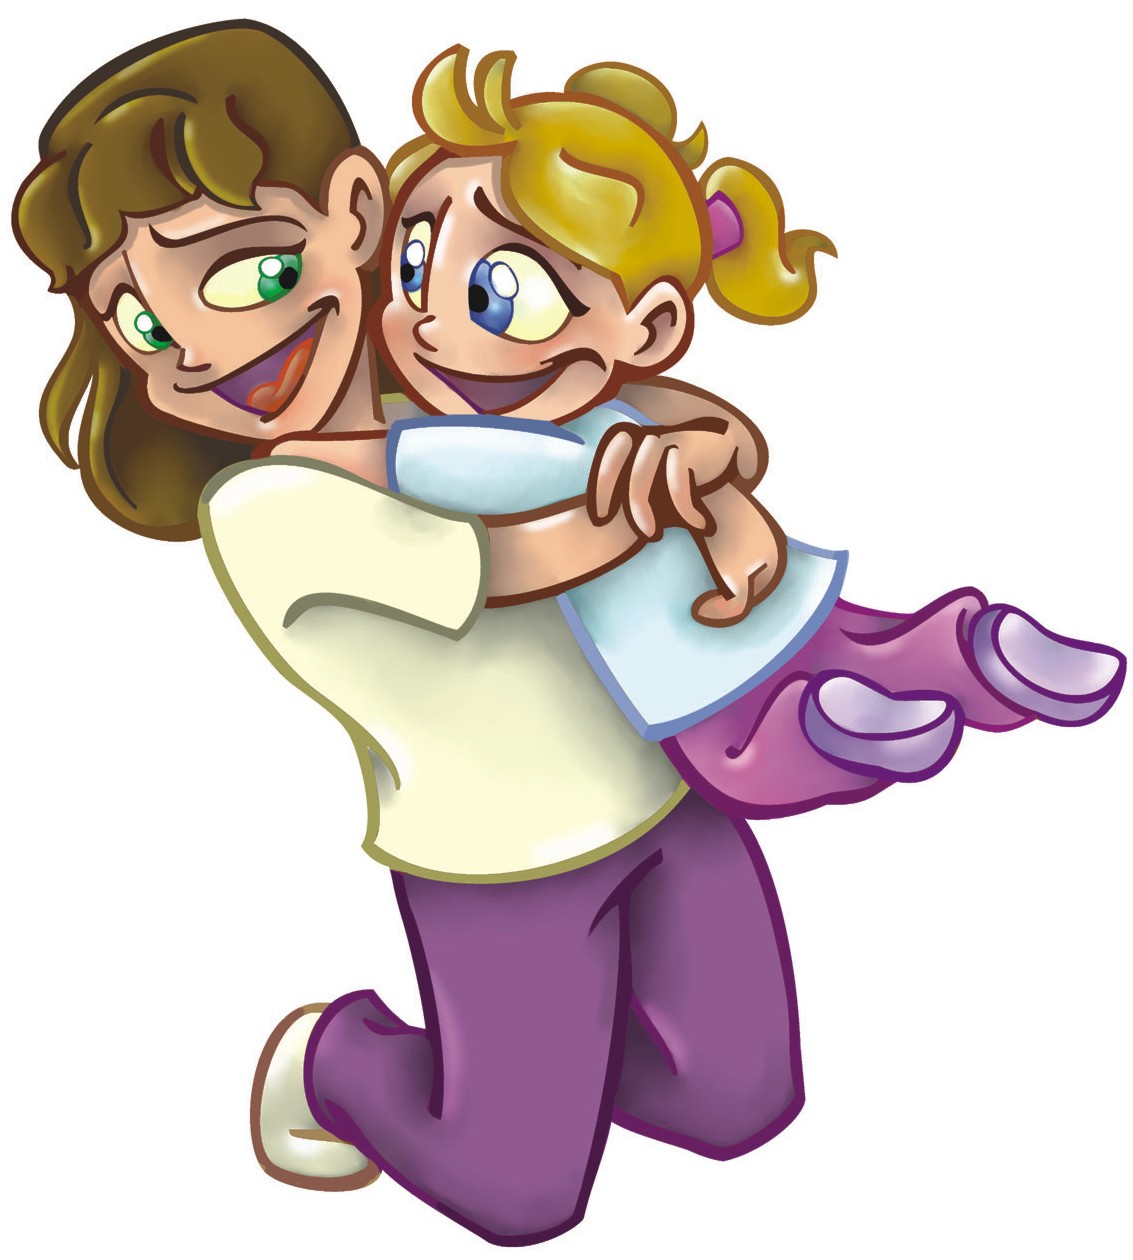 Free Hugs Cliparts, Download Free Clip Art, Free Clip Art on